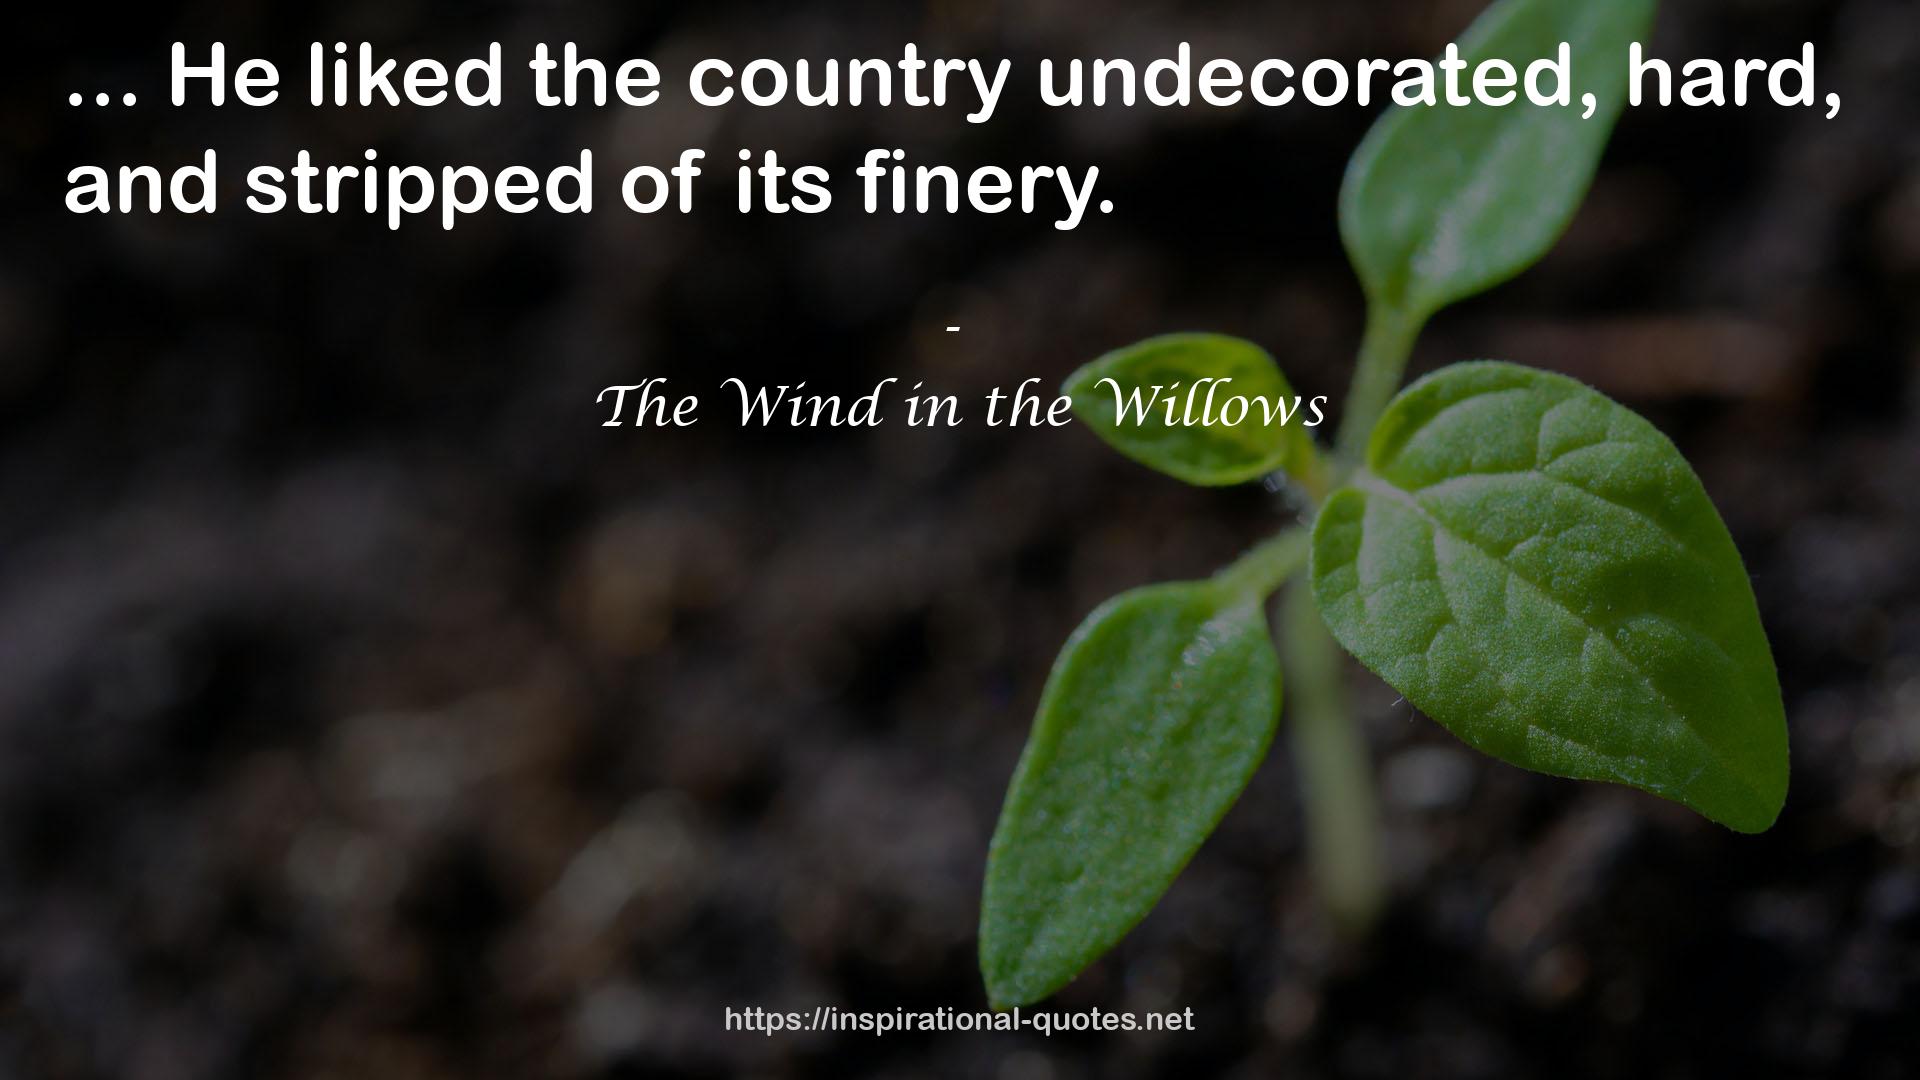 The Wind in the Willows QUOTES